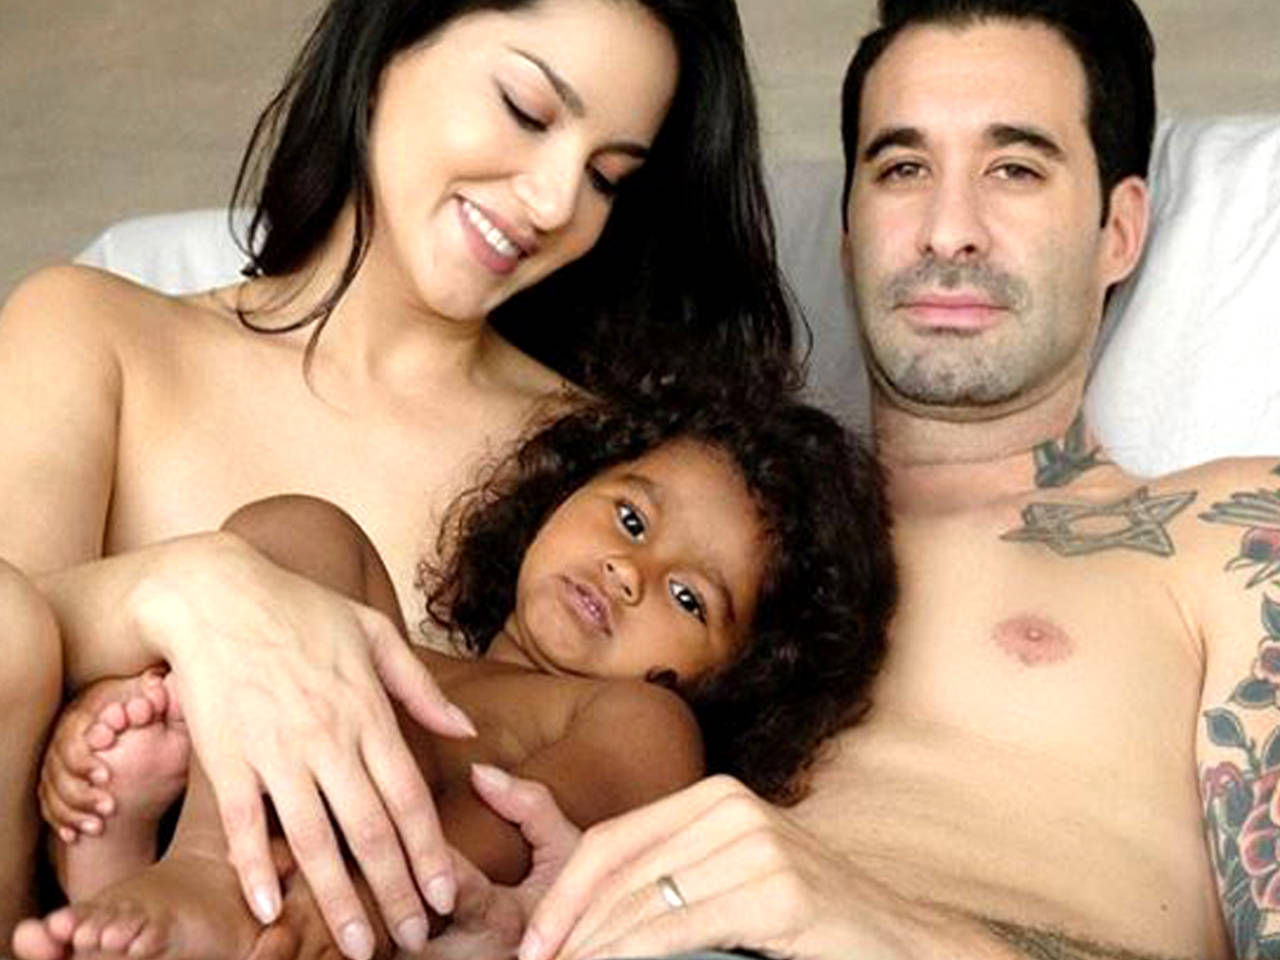 Danny Leon Xxx - Sunny Leone Bold Hot Photo Video: Daniel Weber shares wife Sunny Leone's  bold picture with daughter Nisha Kaur, gets trolled | Hindi Movie News -  Bollywood - Times of India